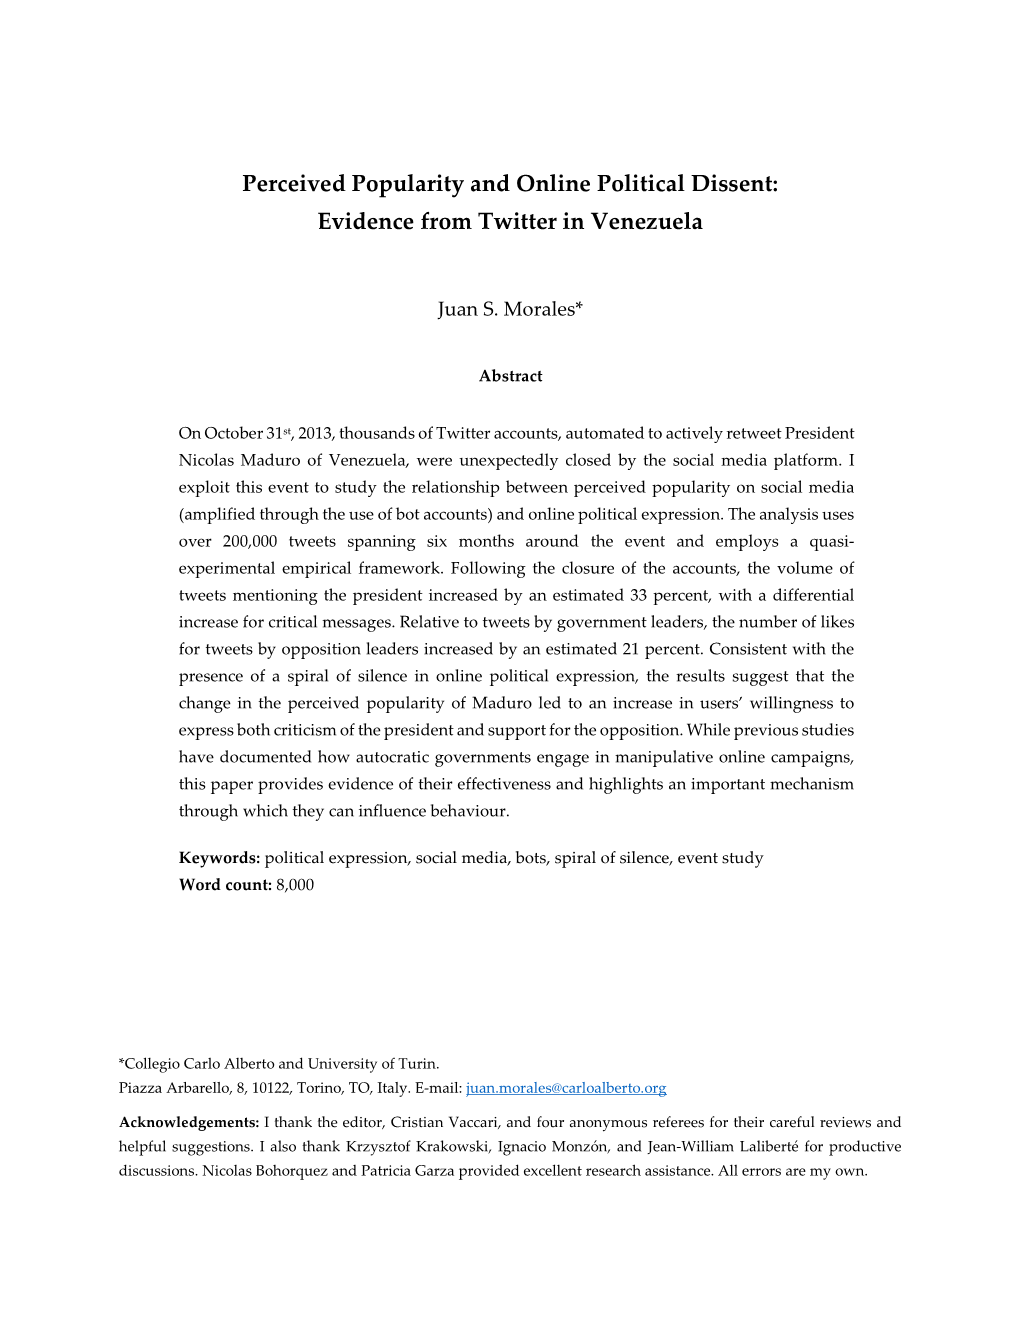 Perceived Popularity and Online Political Dissent: Evidence from Twitter in Venezuela